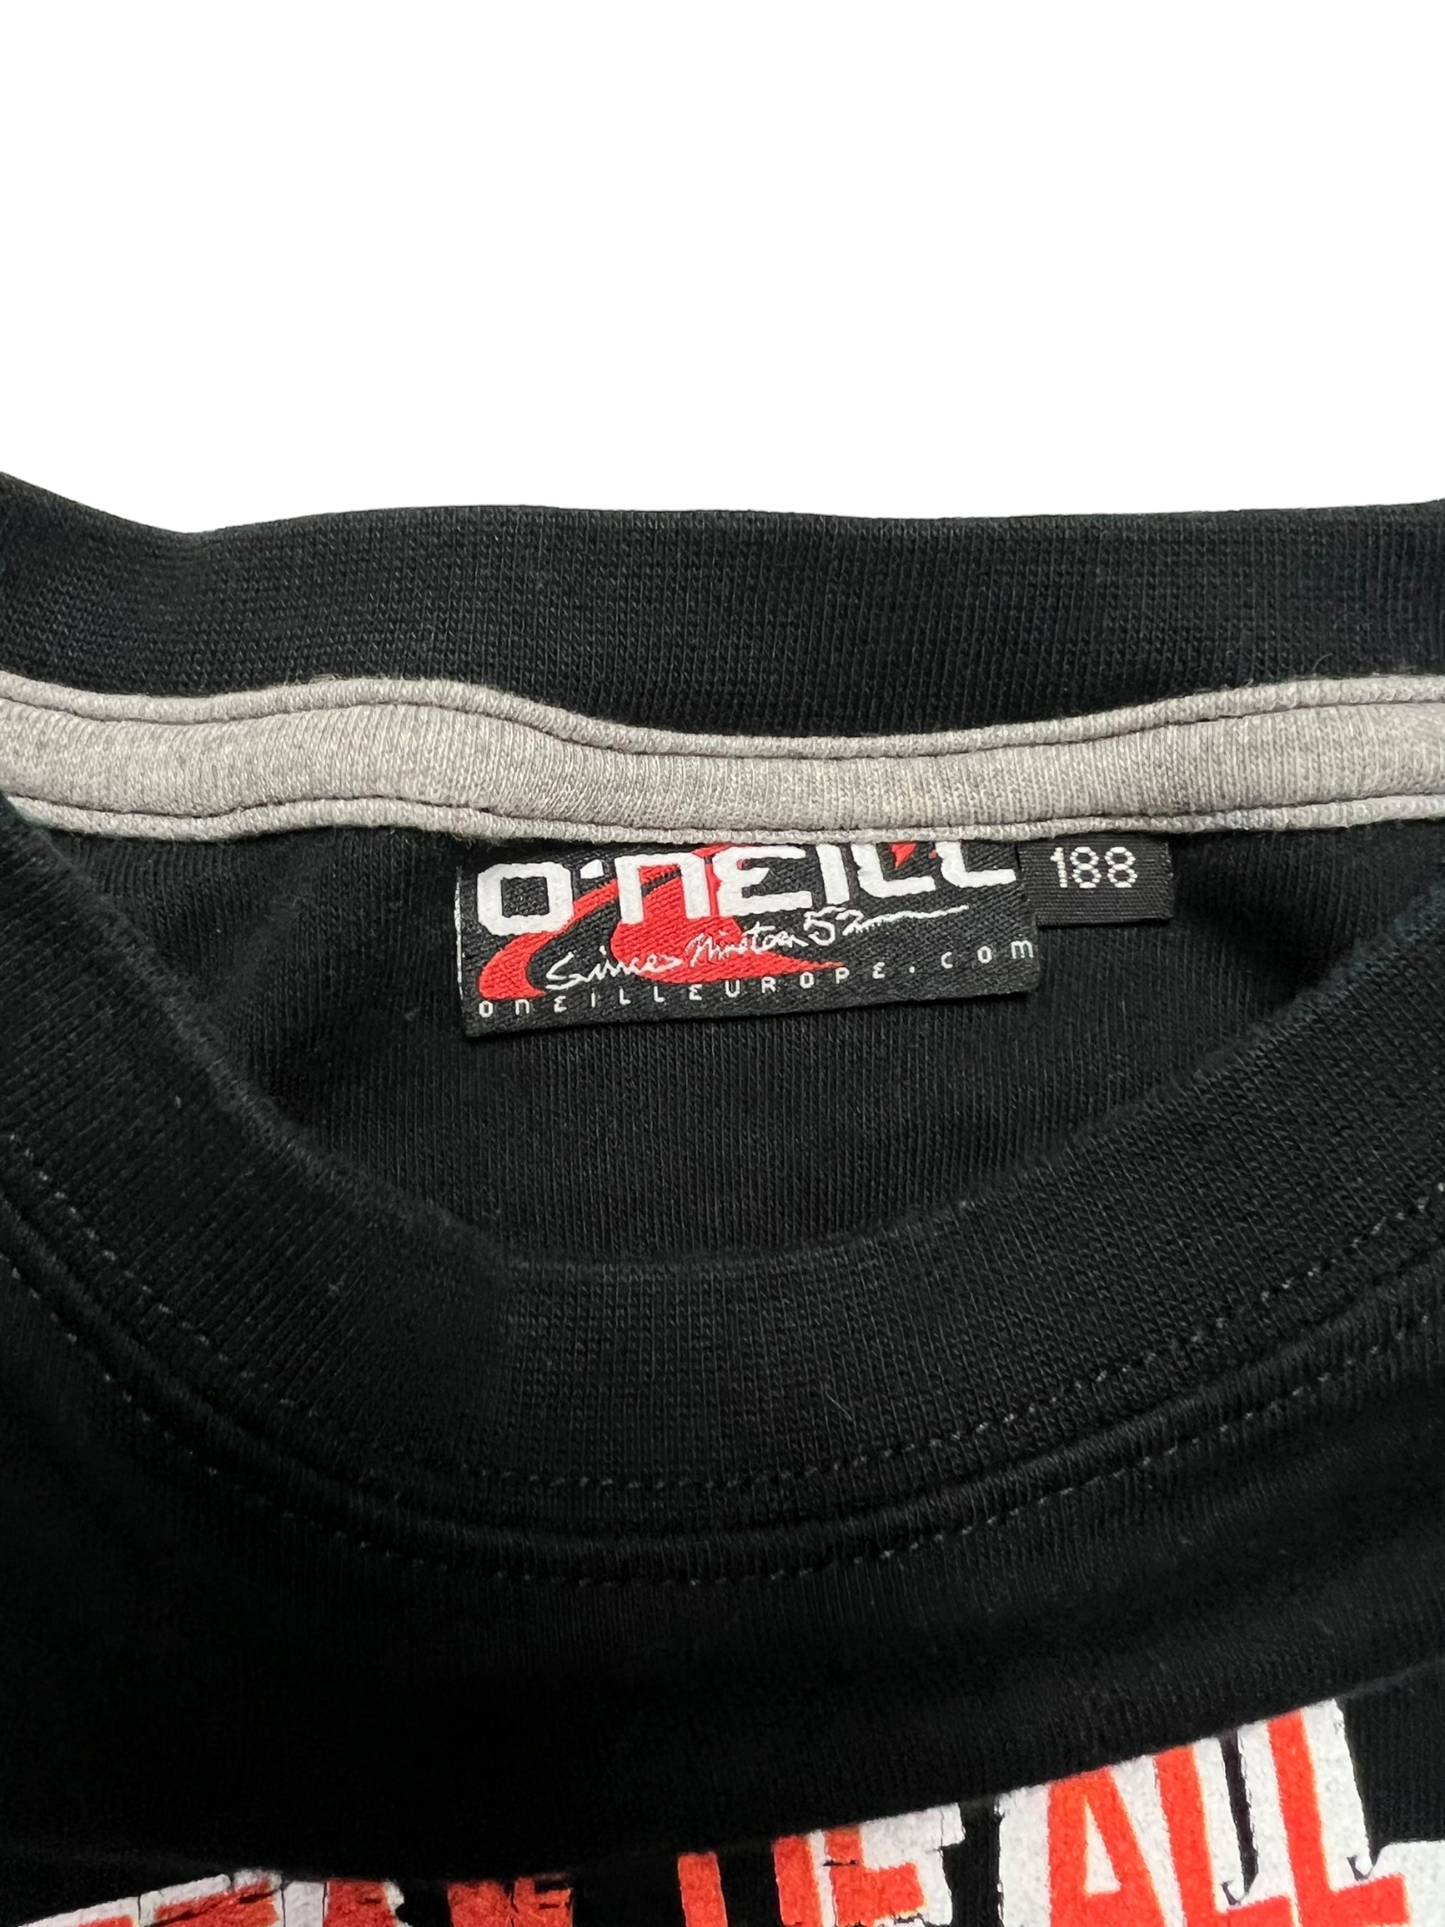 O'Neil two sleeves 2000's sweater - XL